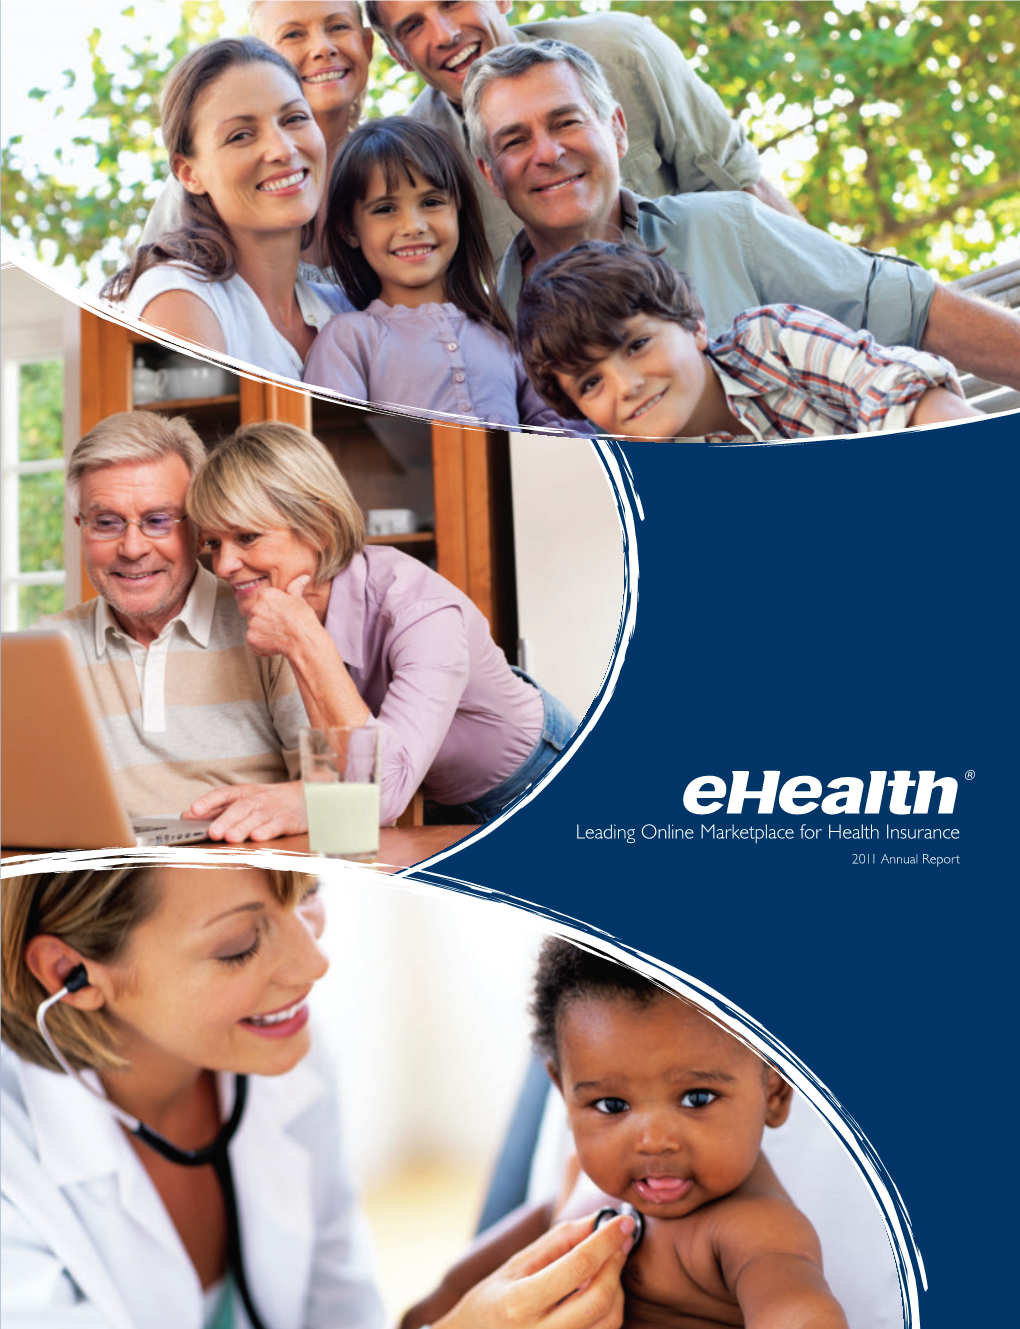 2011 Annual Report Ehealth 2011 Annual Report Ehealth Is the Leading Online Source of Health Insurance for Individuals, Families and Small Businesses